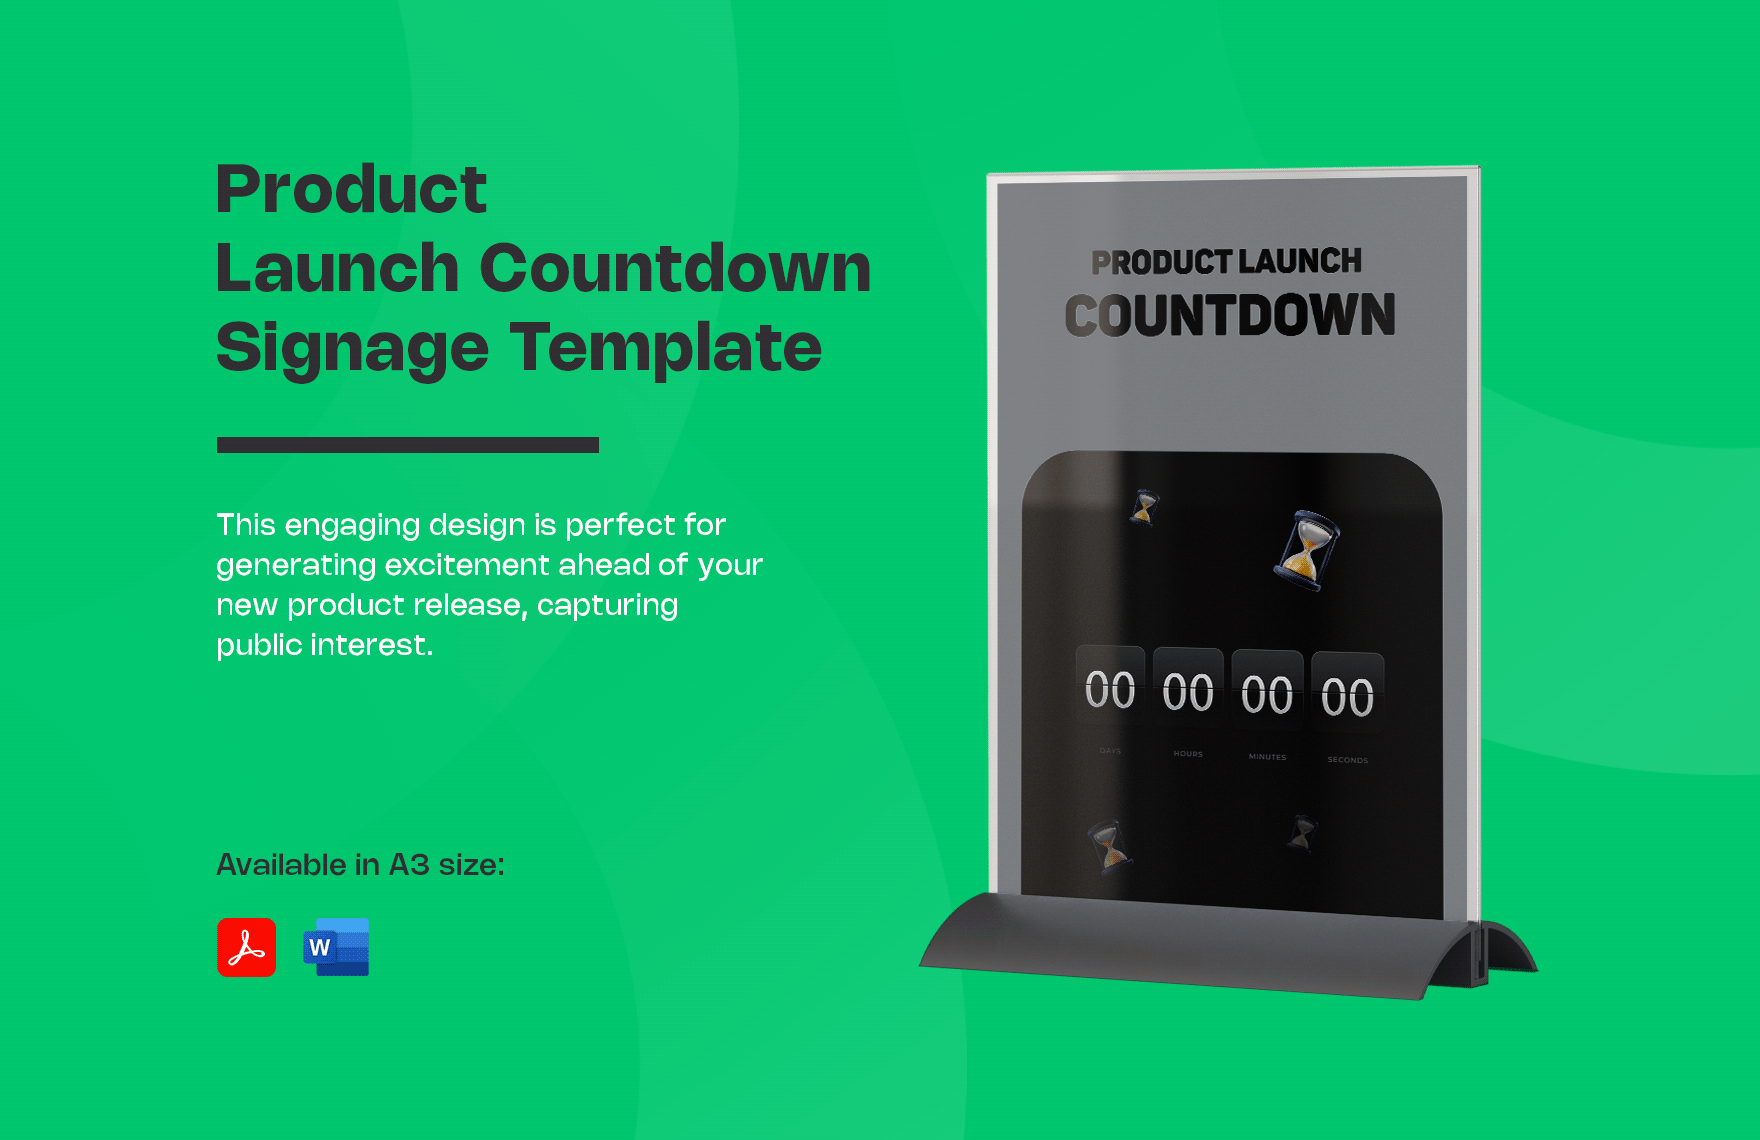 Product Launch Countdown Signage Template